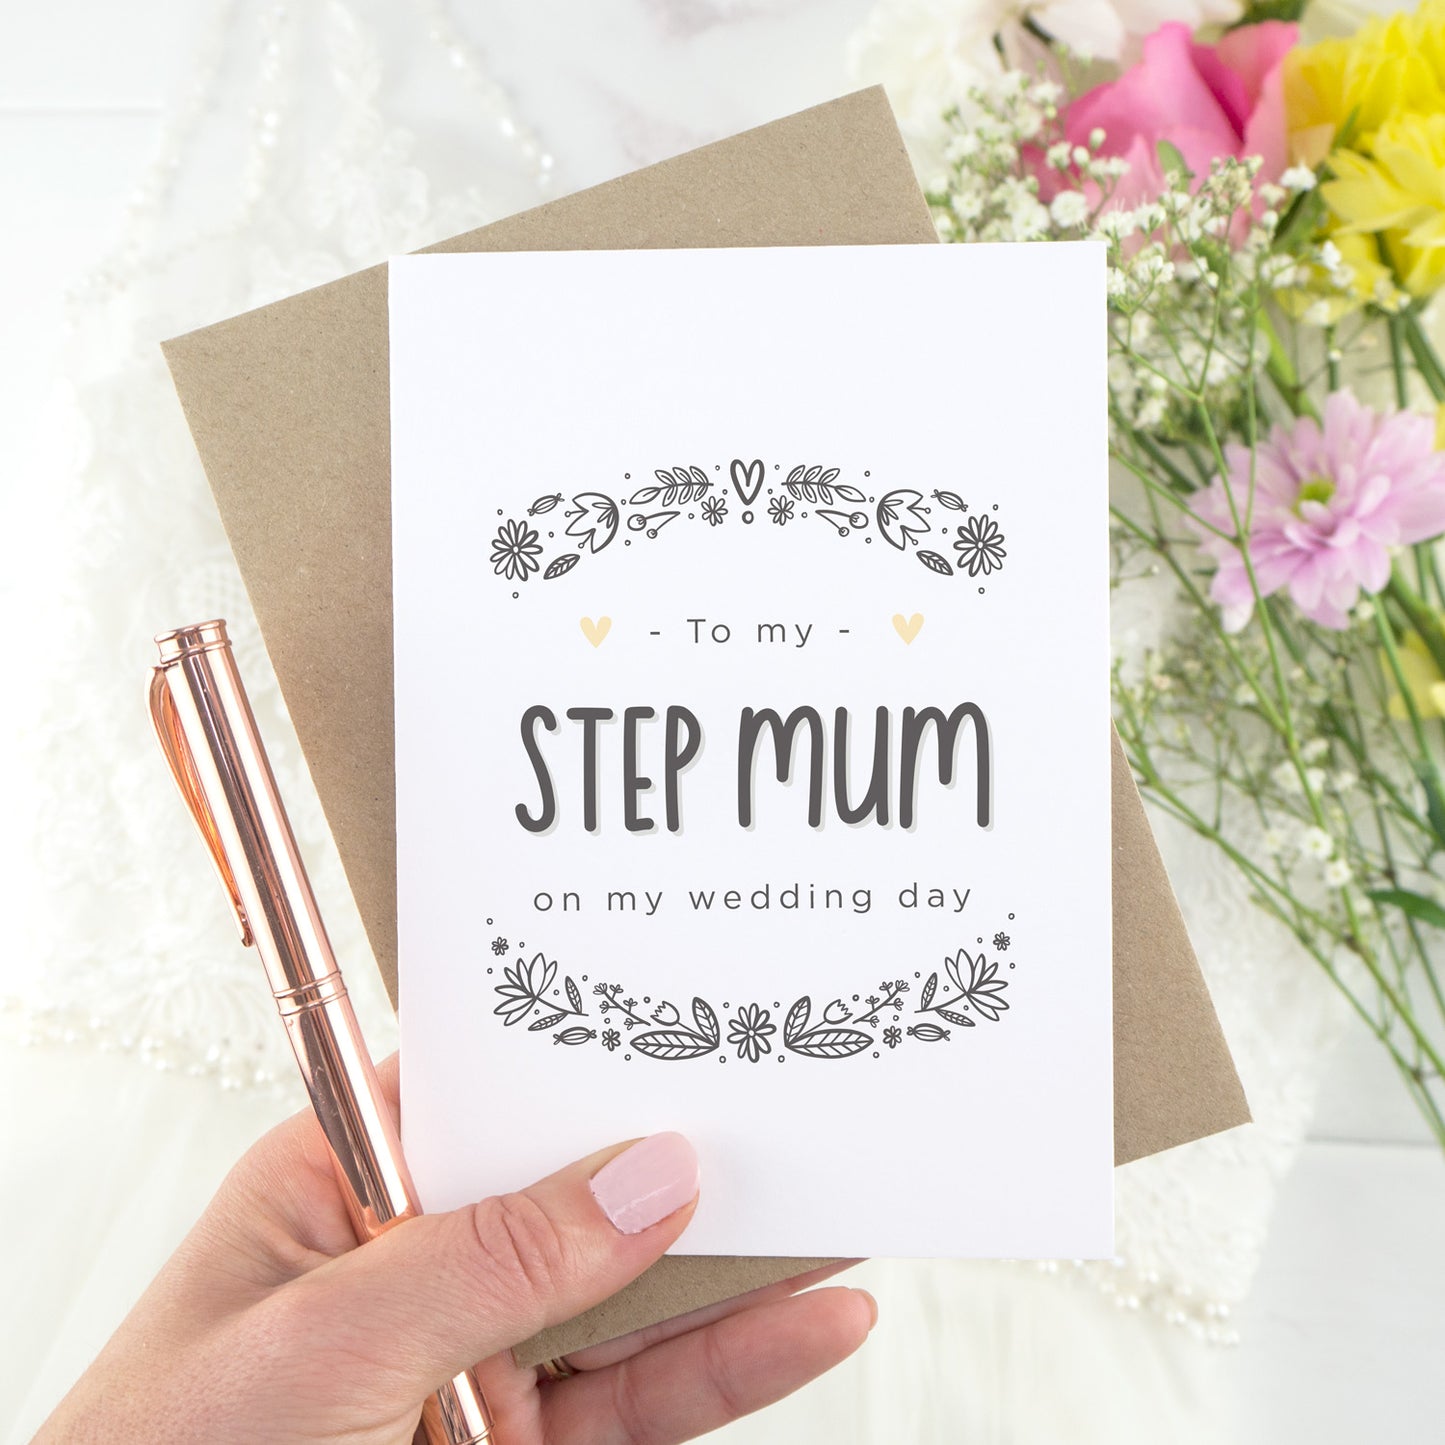 To my step mum on my wedding day. A white card with grey hand drawn lettering, and a grey floral border. The image features a wedding dress and bouquet of flowers.